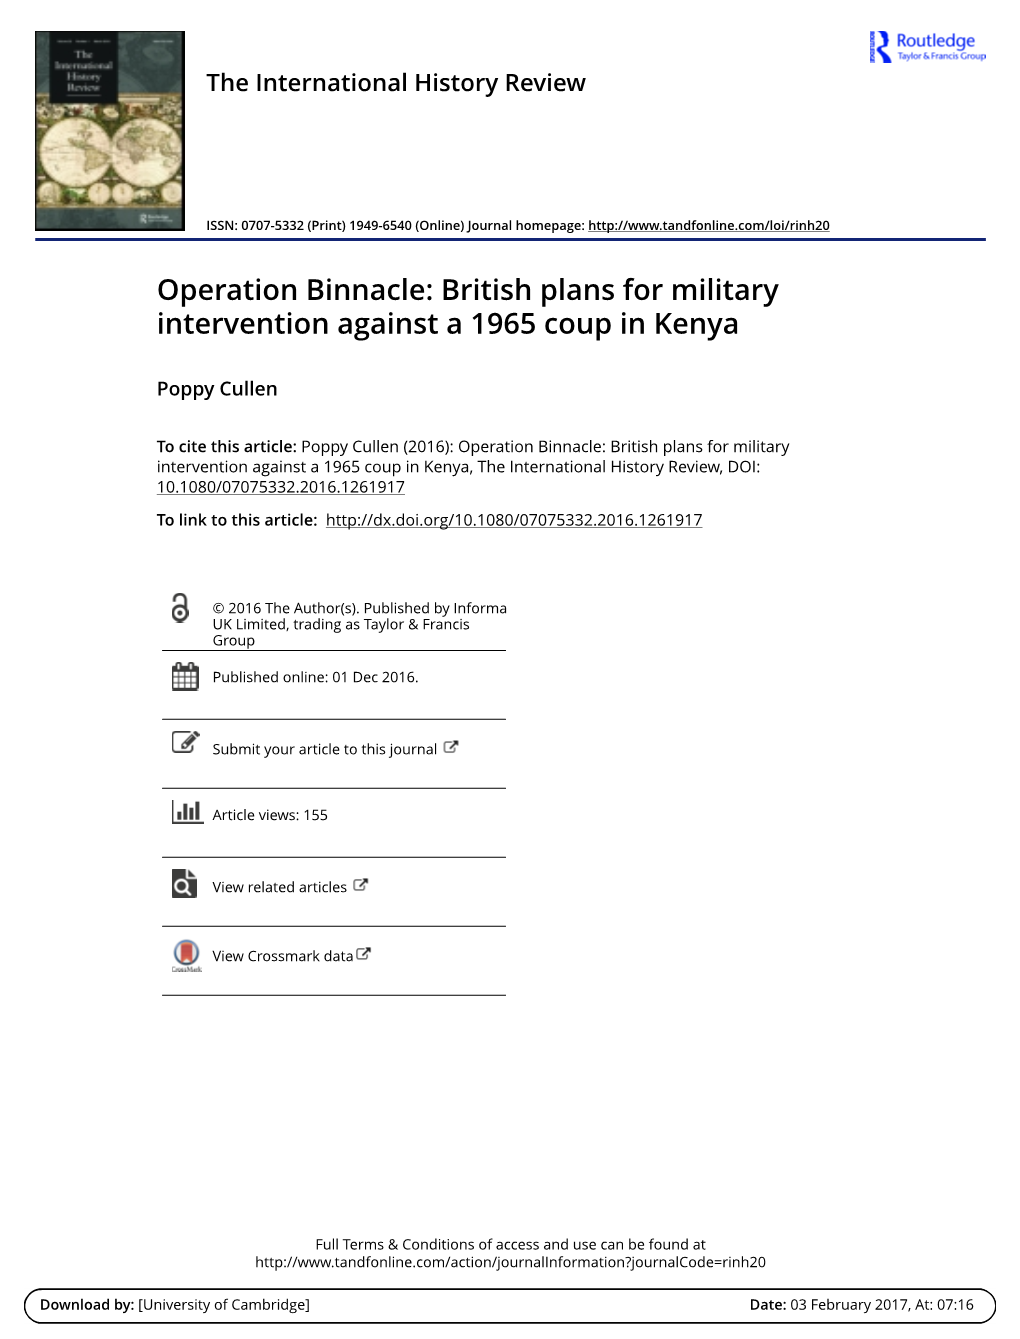 British Plans for Military Intervention Against a 1965 Coup in Kenya